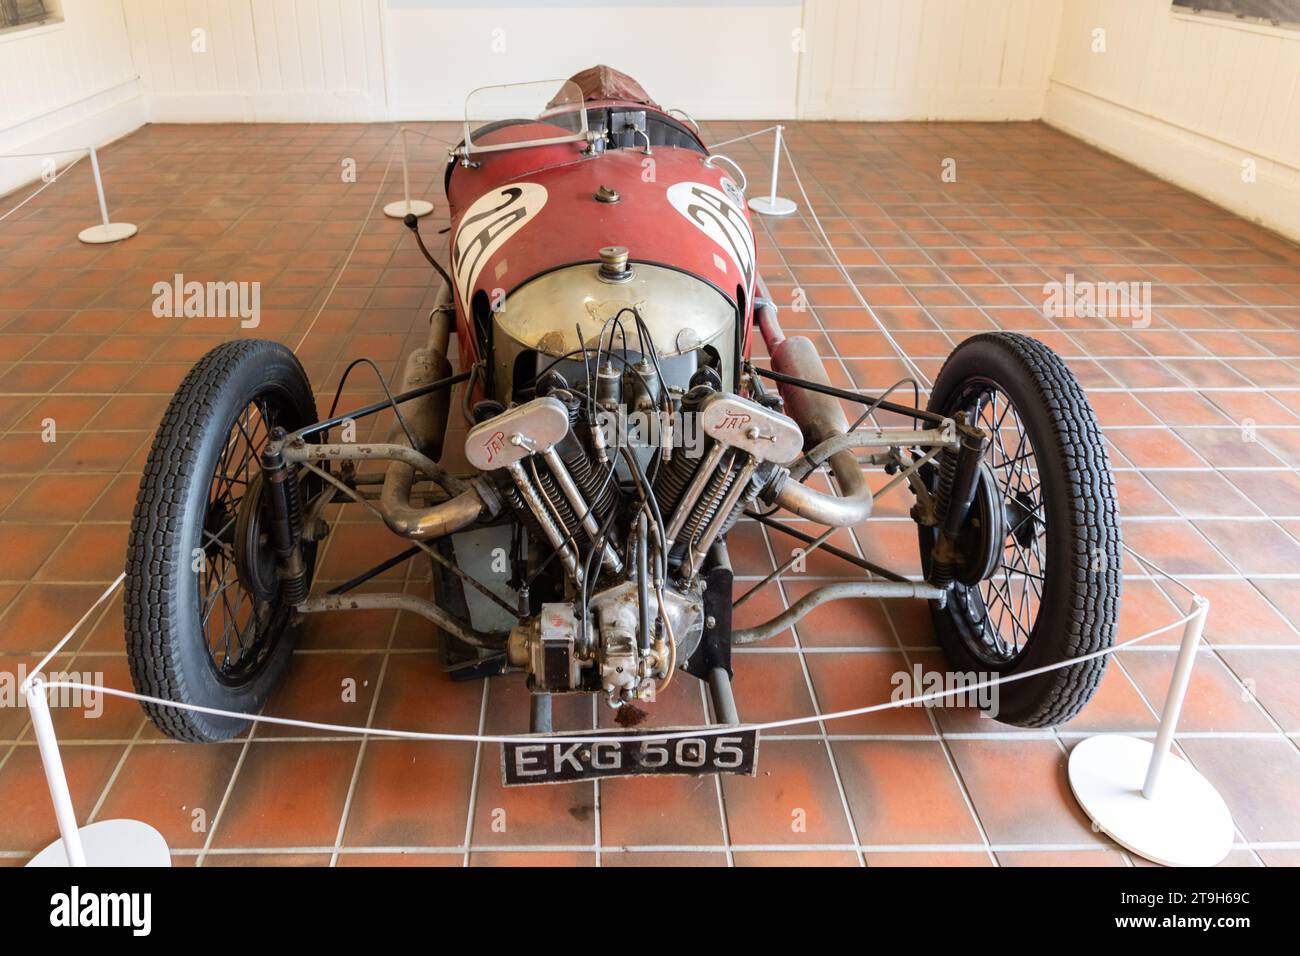 Clive Lones Morgan holder of 37 world records and raced at Brooklands track between 1929-1935. on display at Brooklands museum, Weybridge, Surrey, UK Stock Photo